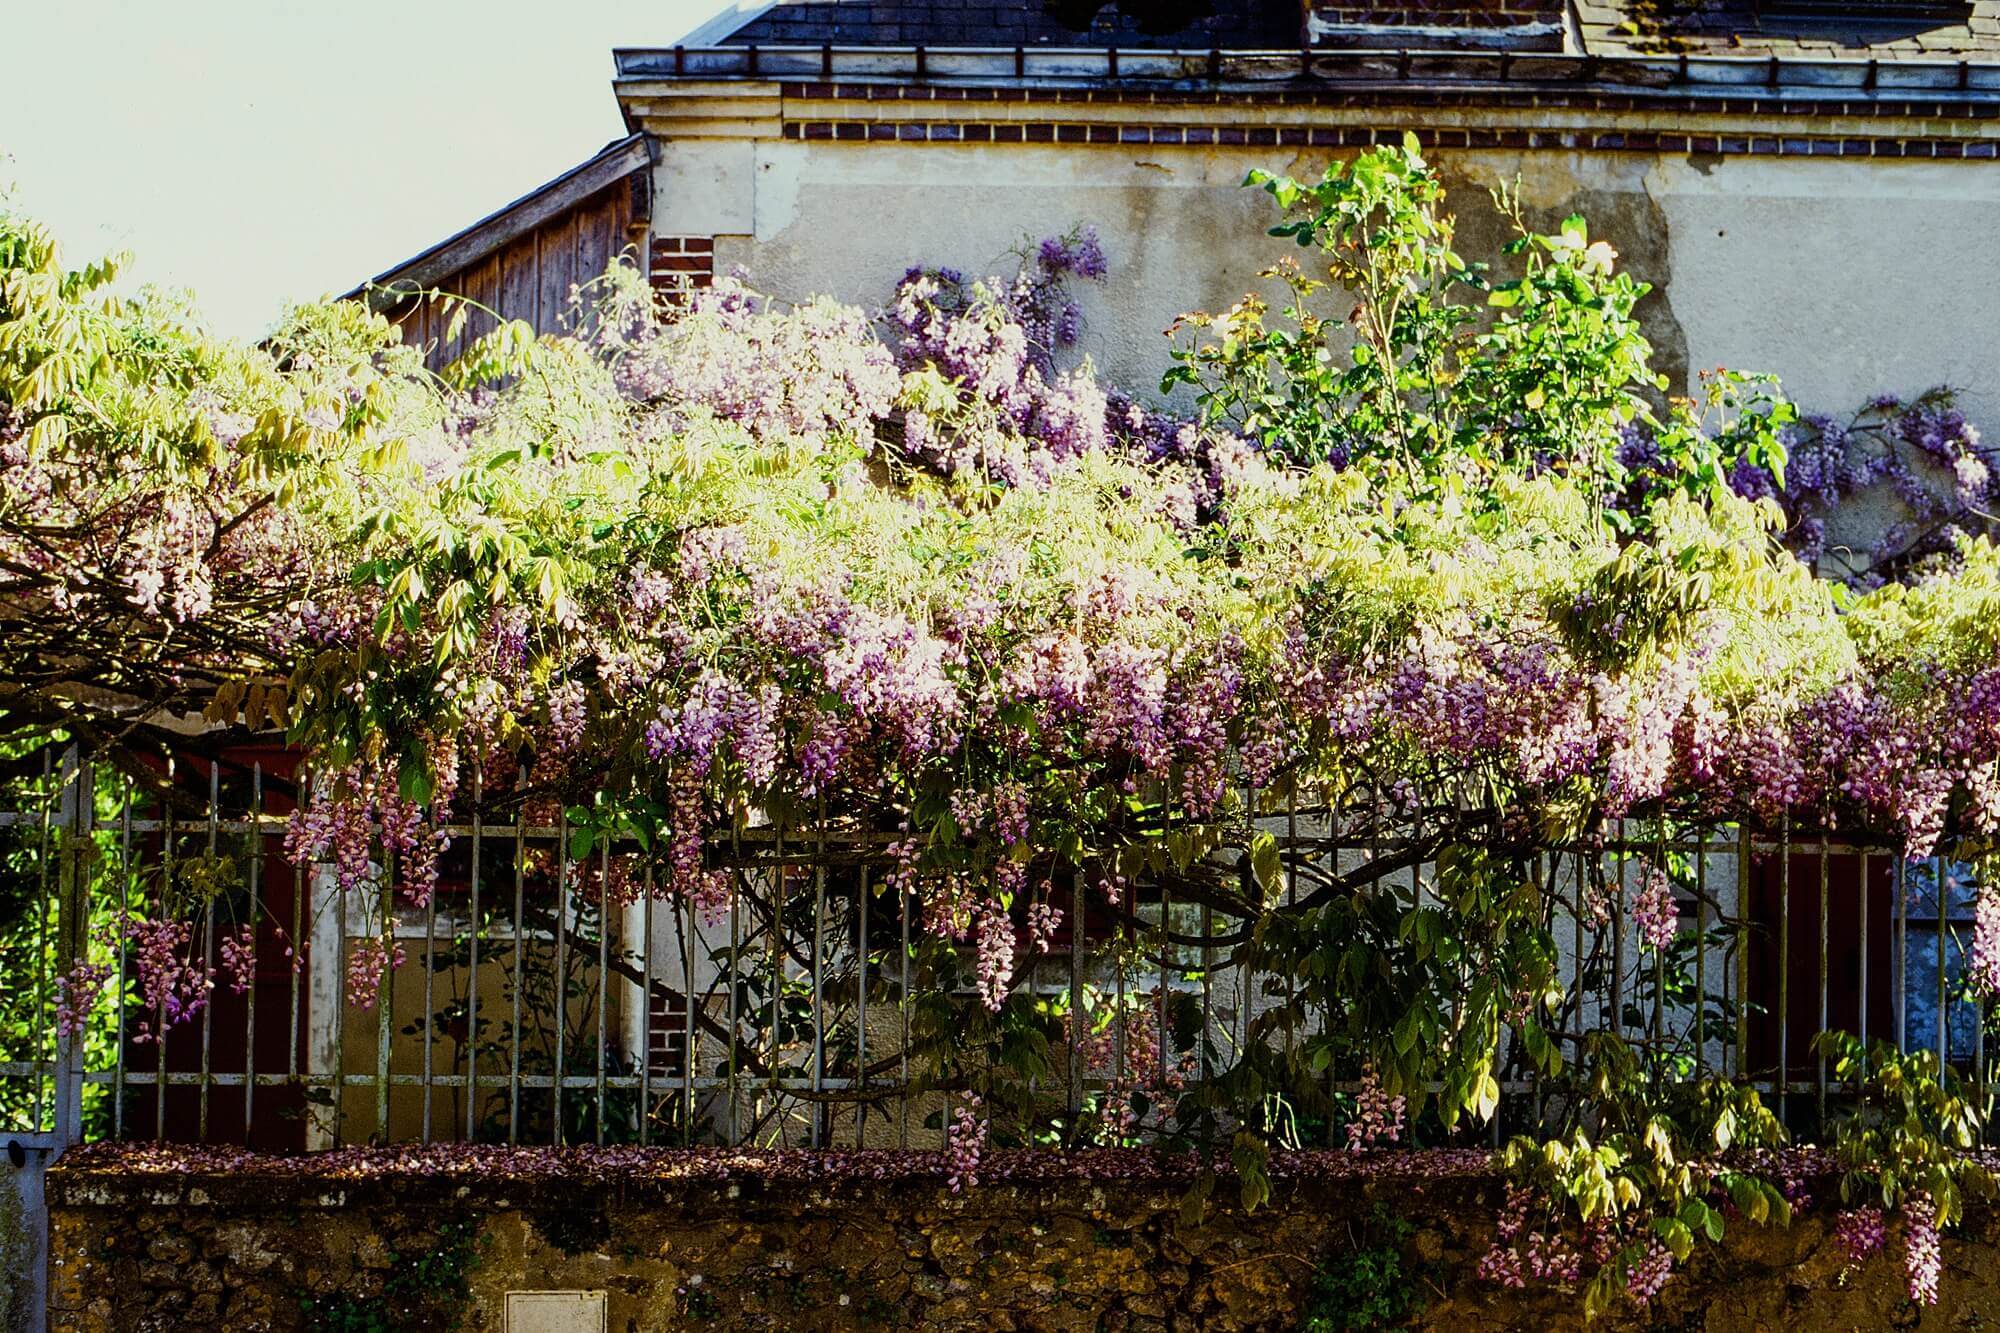 Generous bunches of wisteria hang over a fence in the French countryside during the COVID 19 quarantine. 